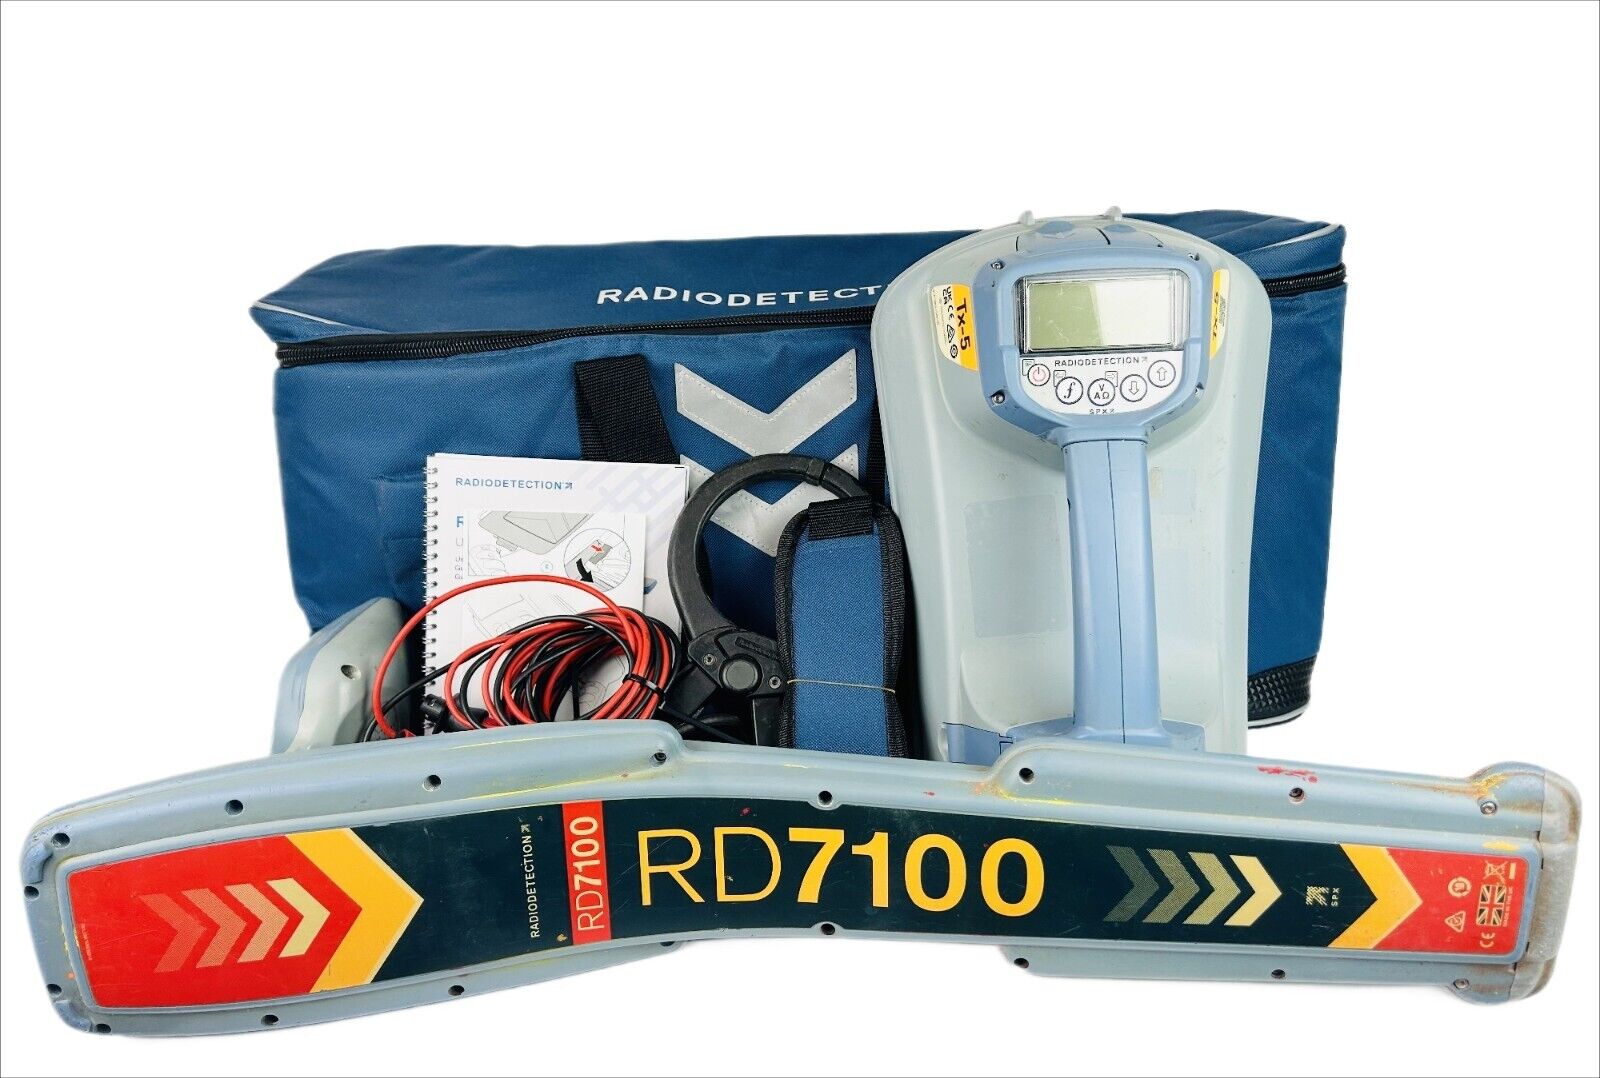 RADIODETECTION RD7100 DL w/ TX-5 Transmitter Locator Kit and Accessories RD 7100